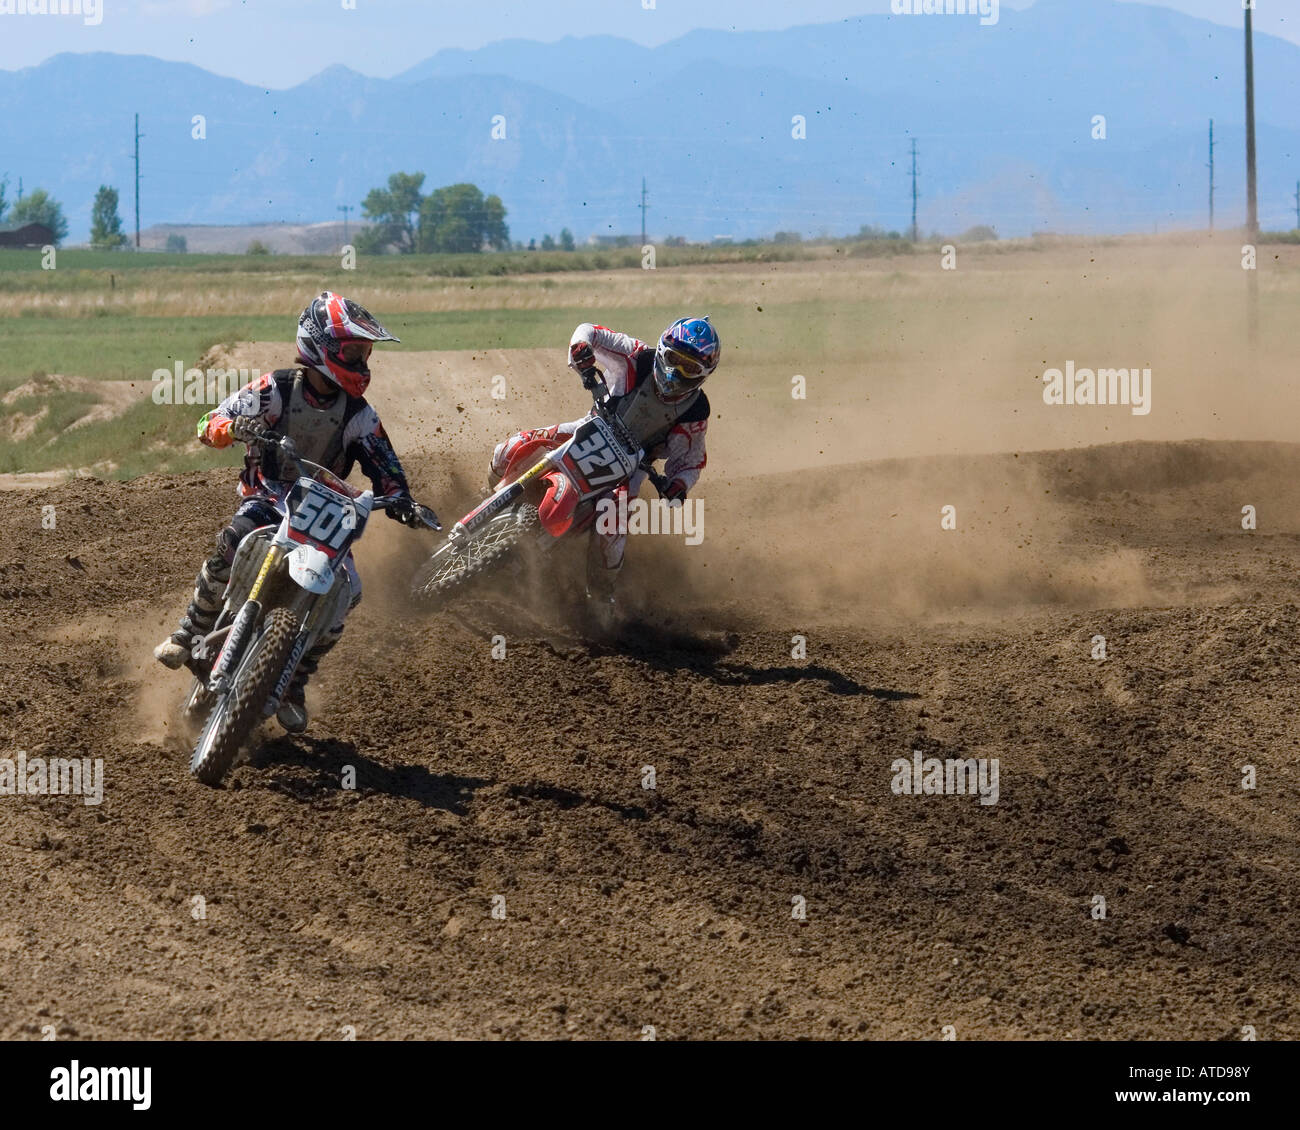 Dirt bikes at motocross track much dust Stock Photo